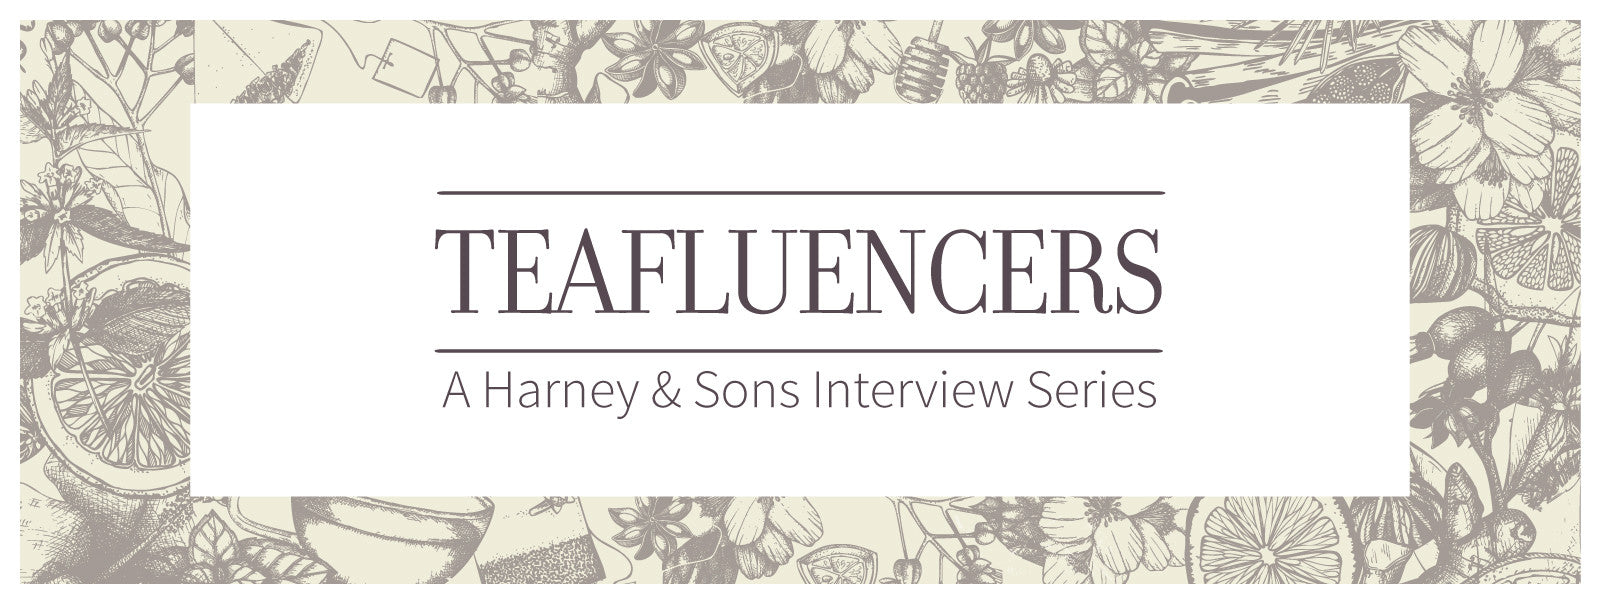 Harney & Sons Teafluencer Interview: Crai S. Bower